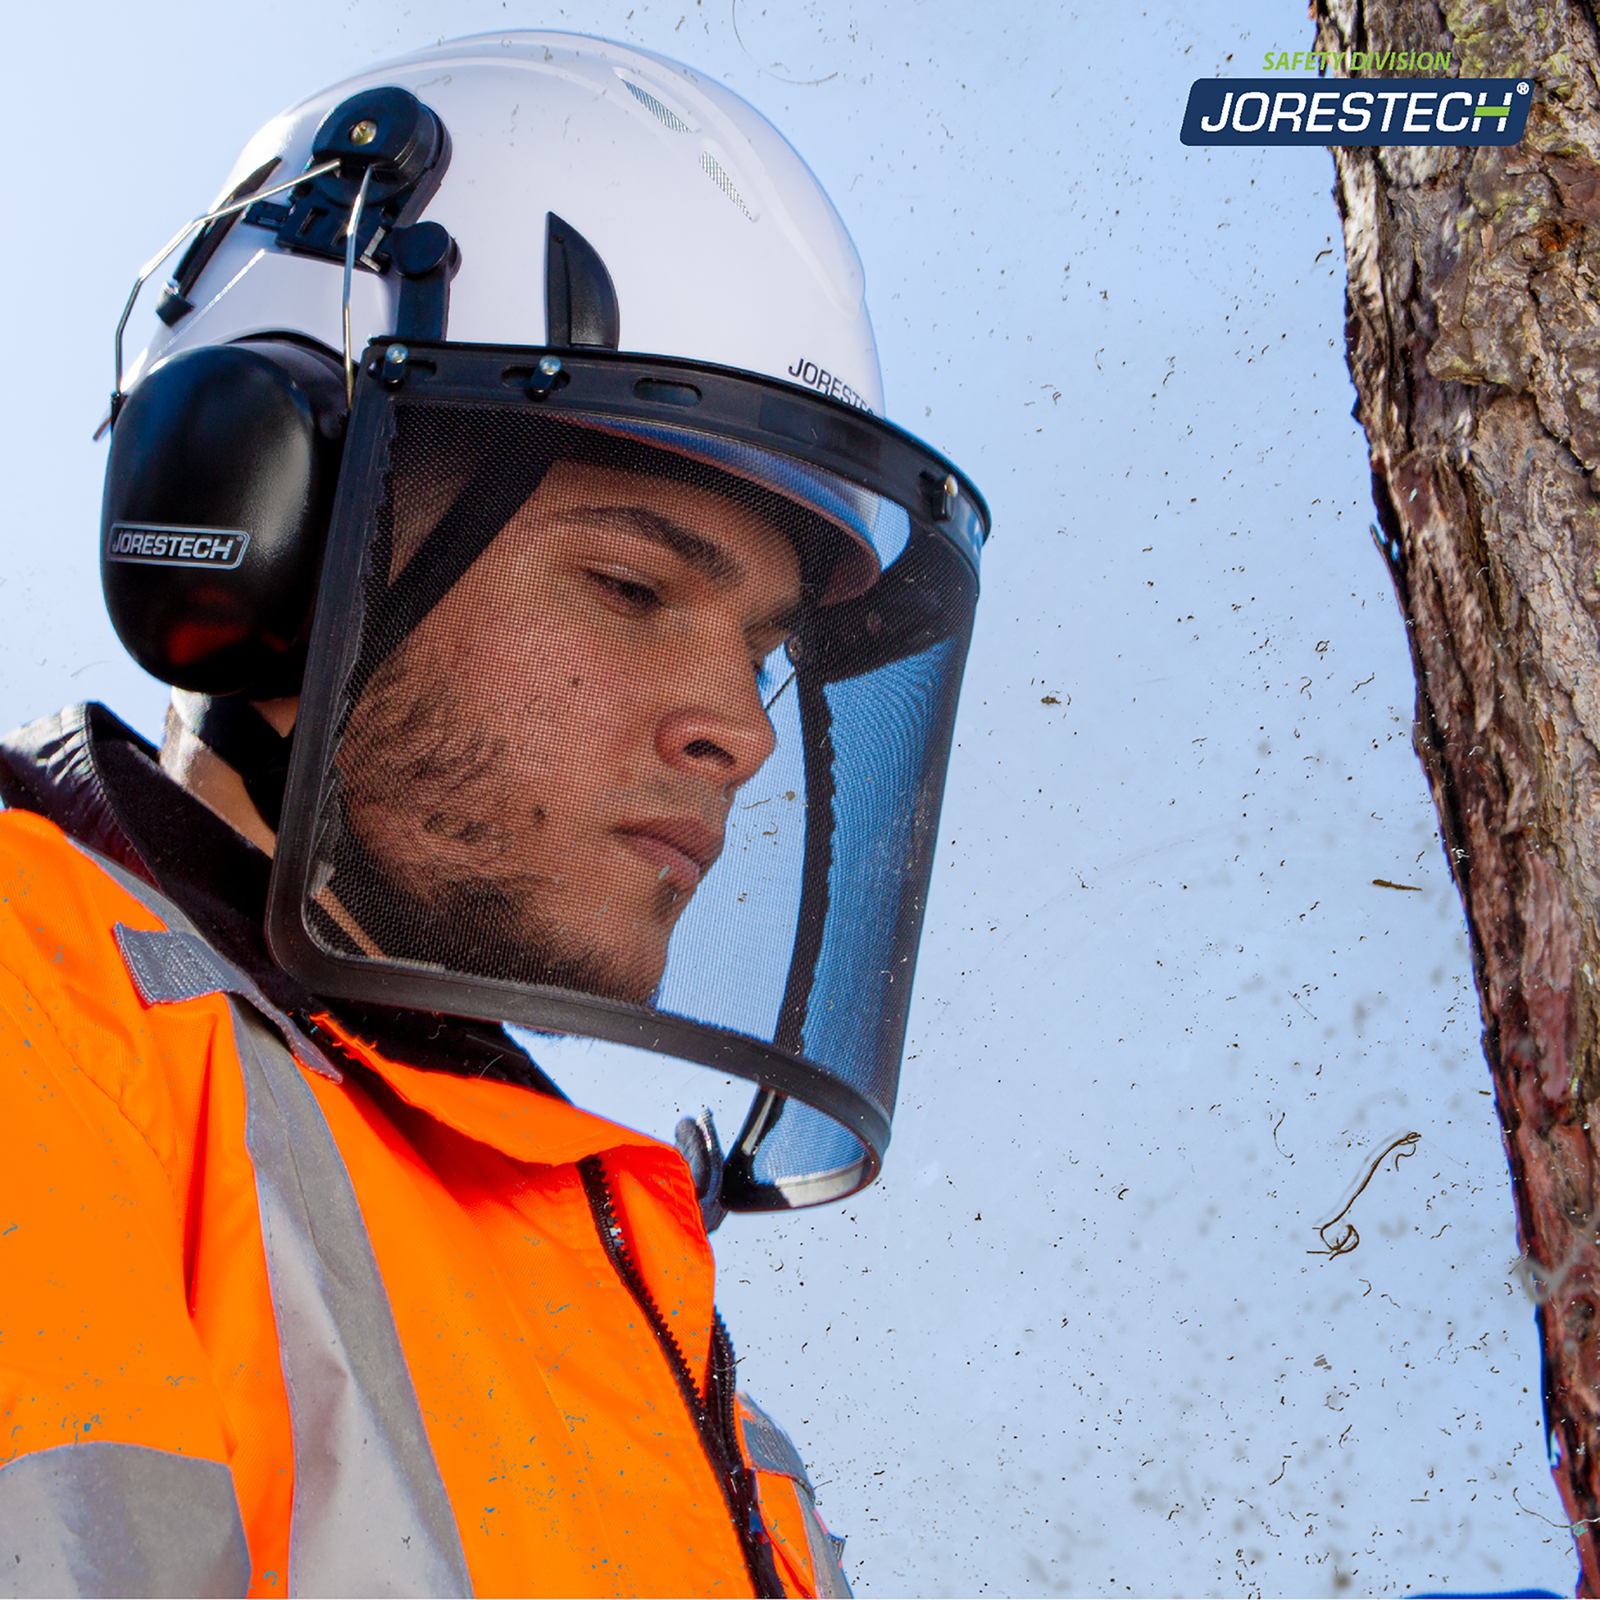 An arborist cutting some branches while wearing the white jorestech ventilated safety helmet with the iron mesh face shield and earmuff attachments.